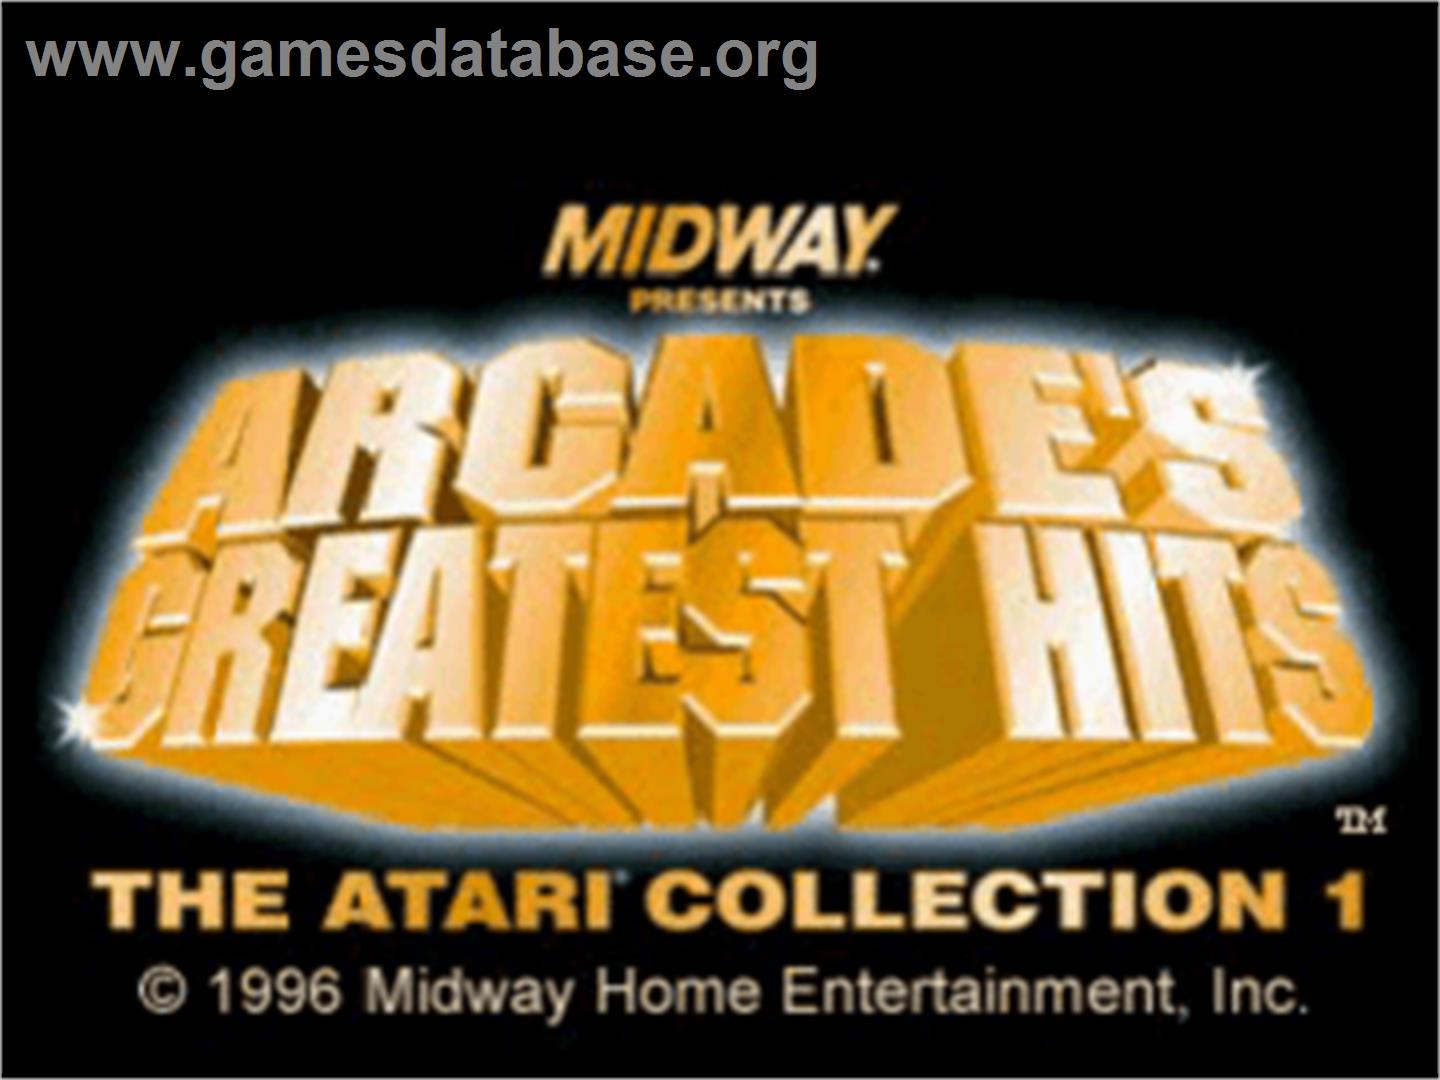 Arcade's Greatest Hits: The Atari Collection 1 - Sony Playstation - Artwork - Title Screen